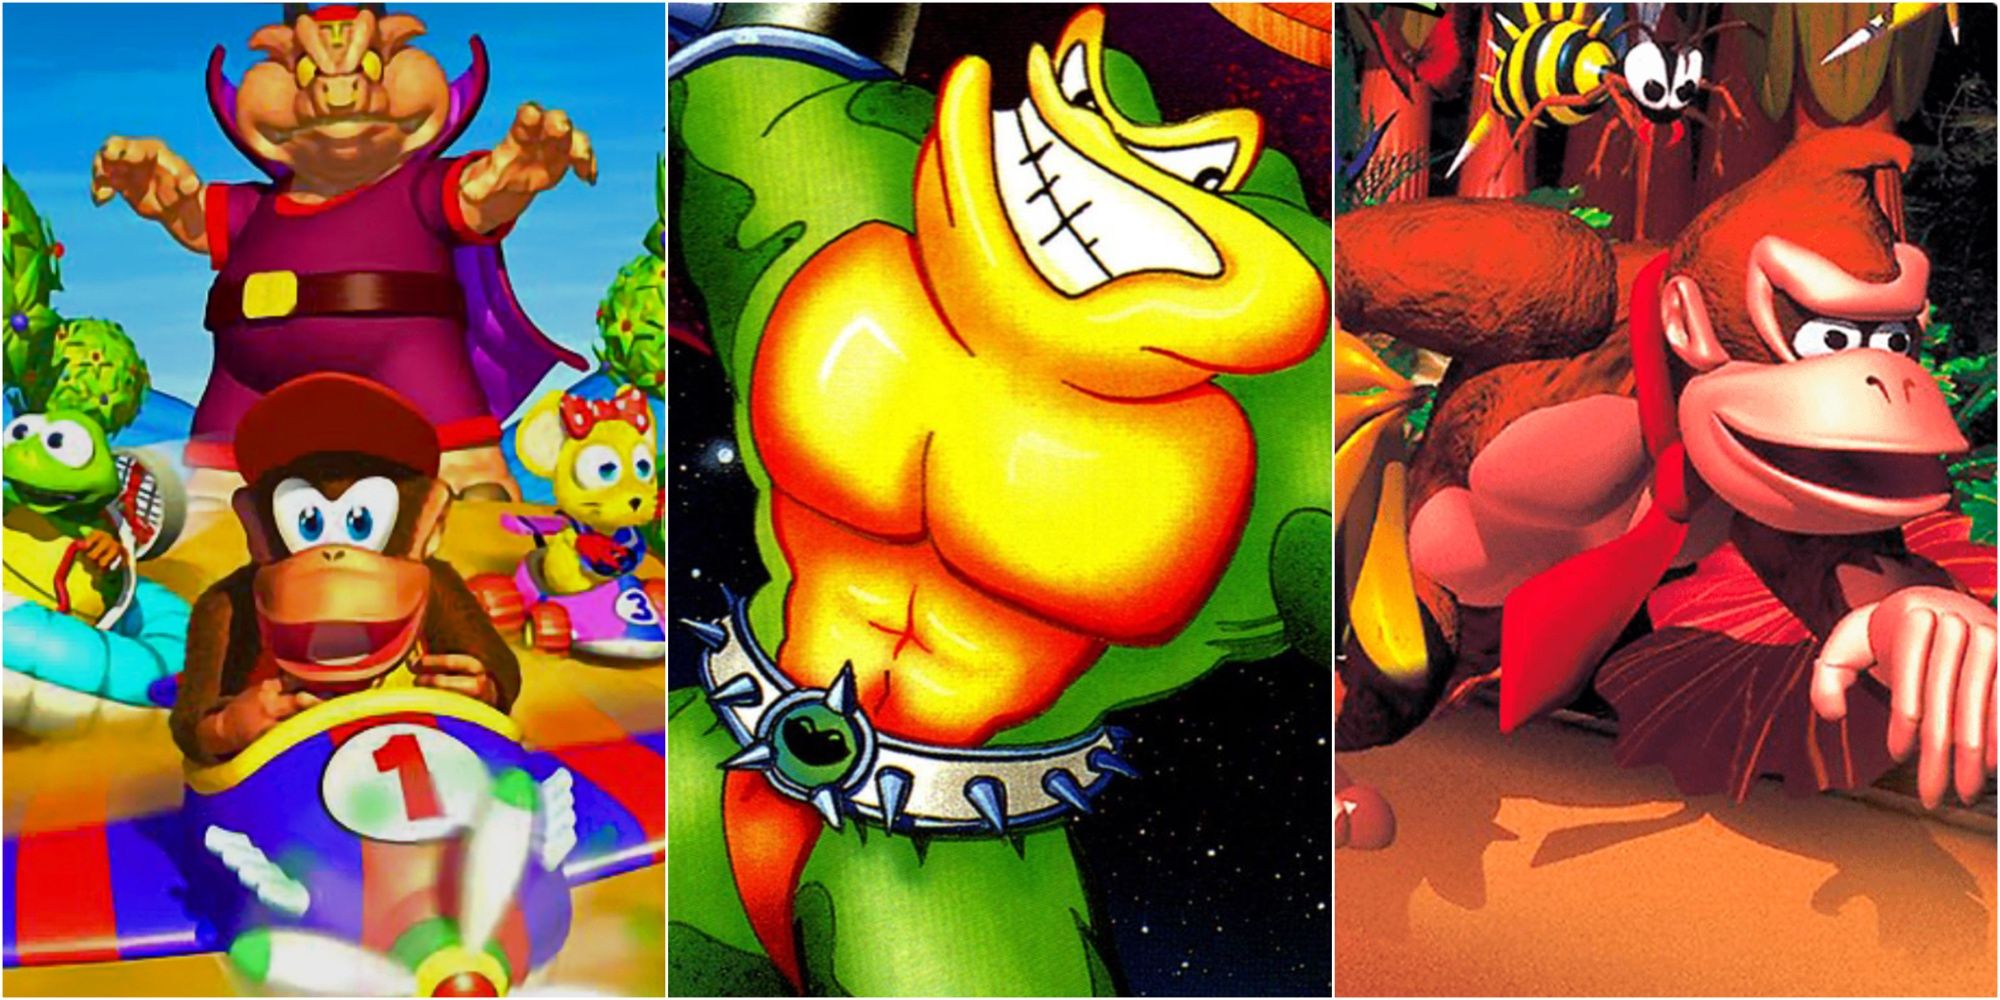 Diddy Kong Racing, Battletoads, and Donkey Kong Country 